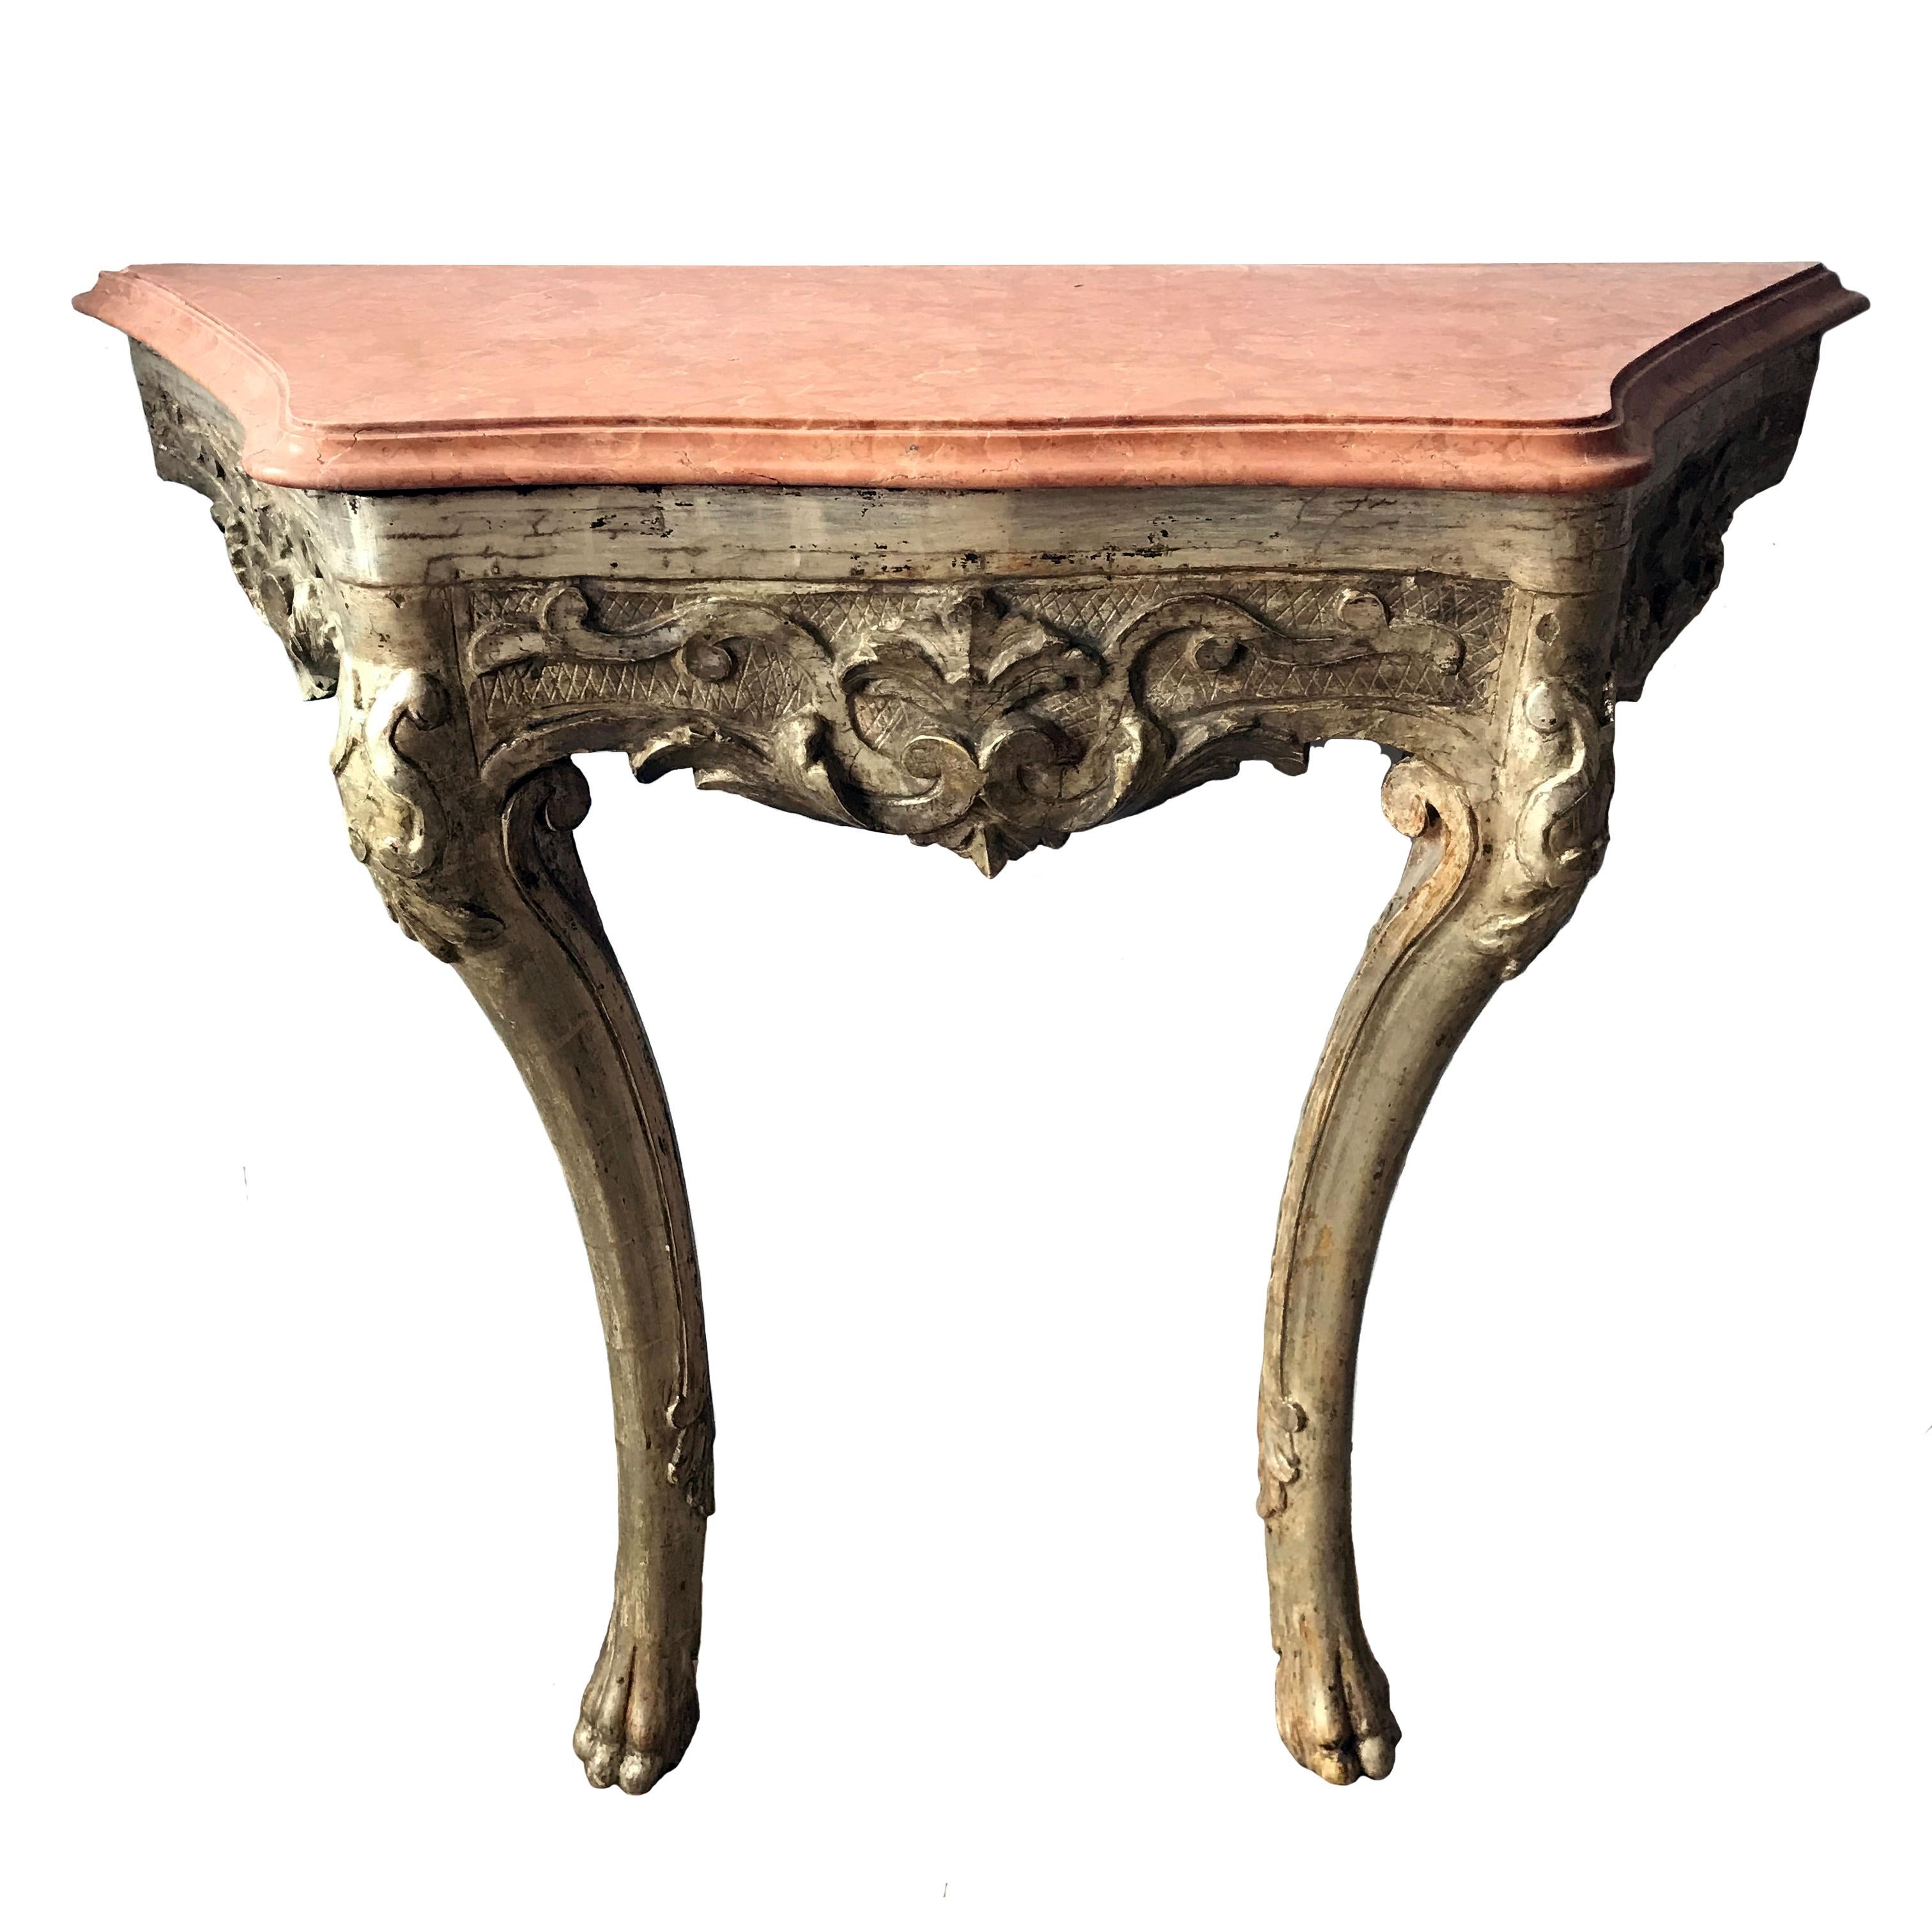 A stunning pair of Italian late C18th silvered carved wood console tables. The later Violet de Brignoles marble tops have a soft moulded edge sitting above a bolding carved apron of flowing acanthus leaves and C-scrolls on a hatched background. The